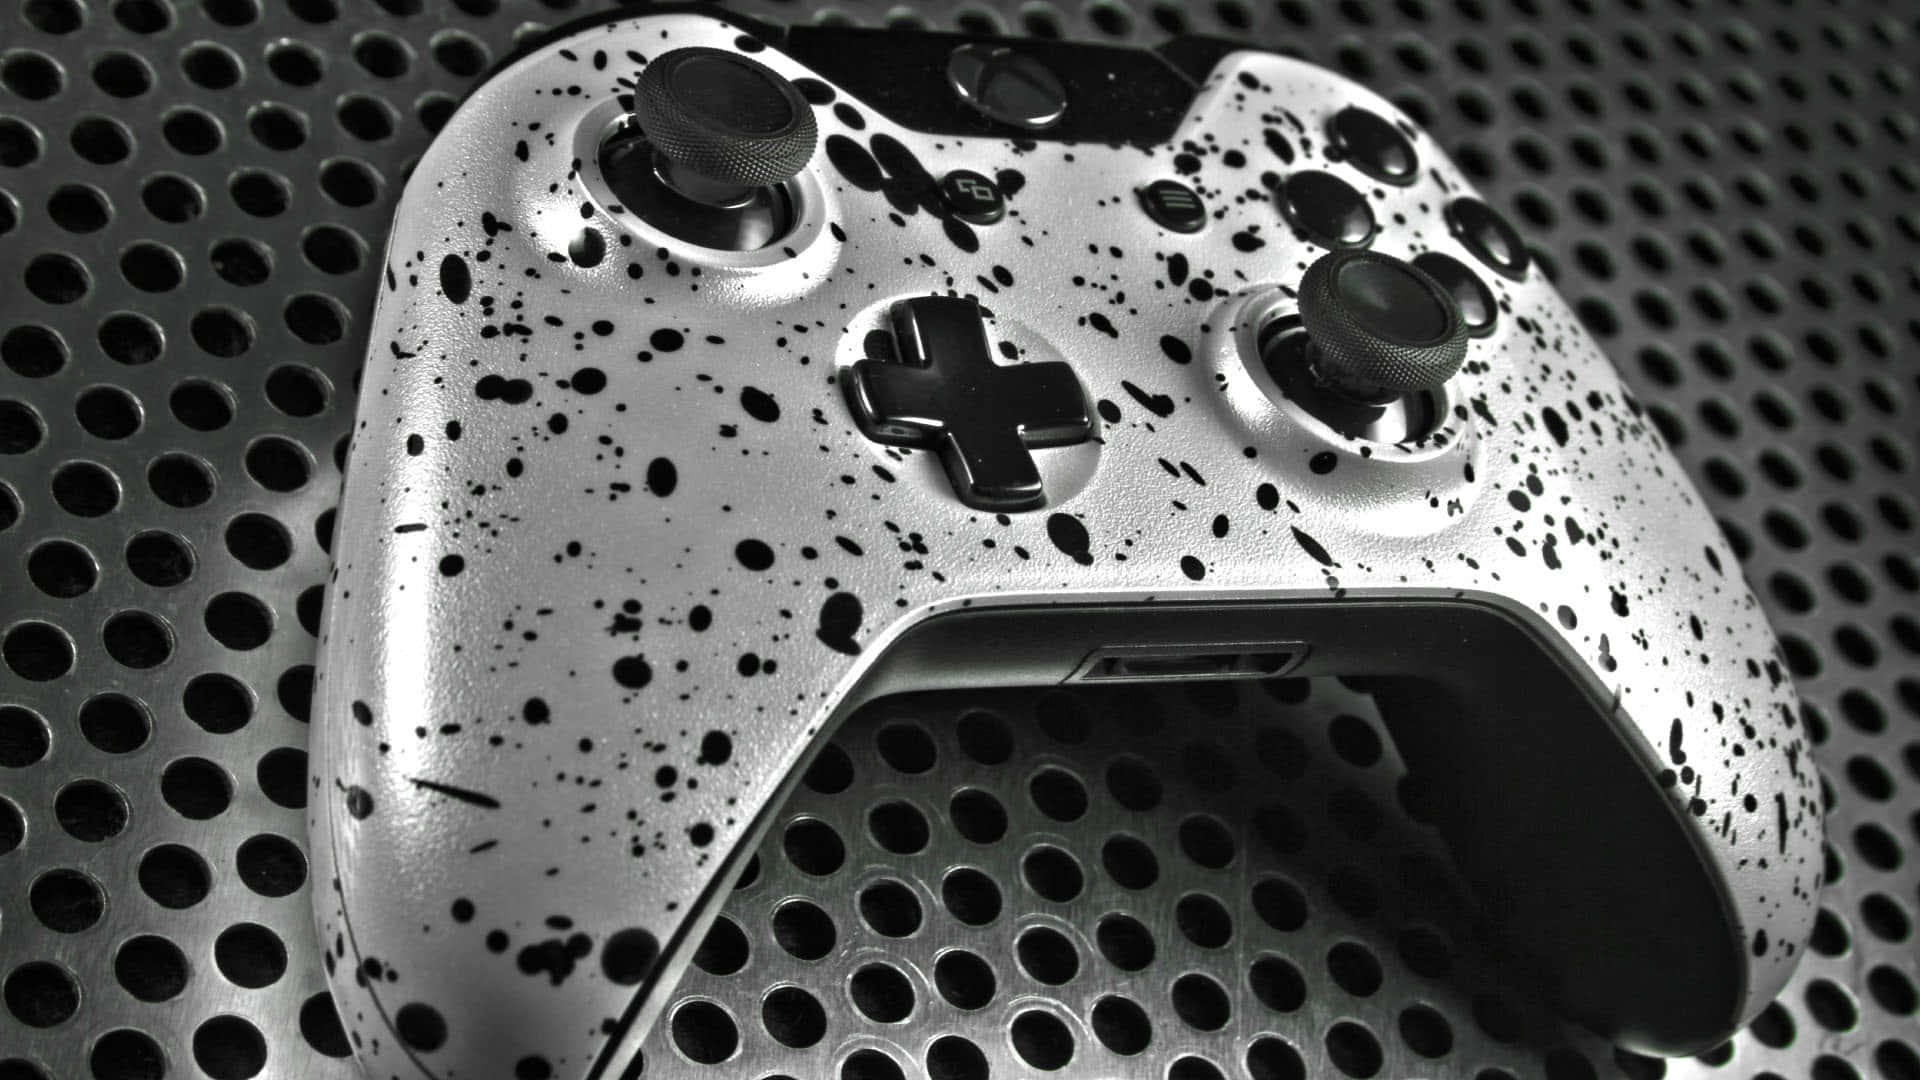 Get the Coolest Console around. Wallpaper